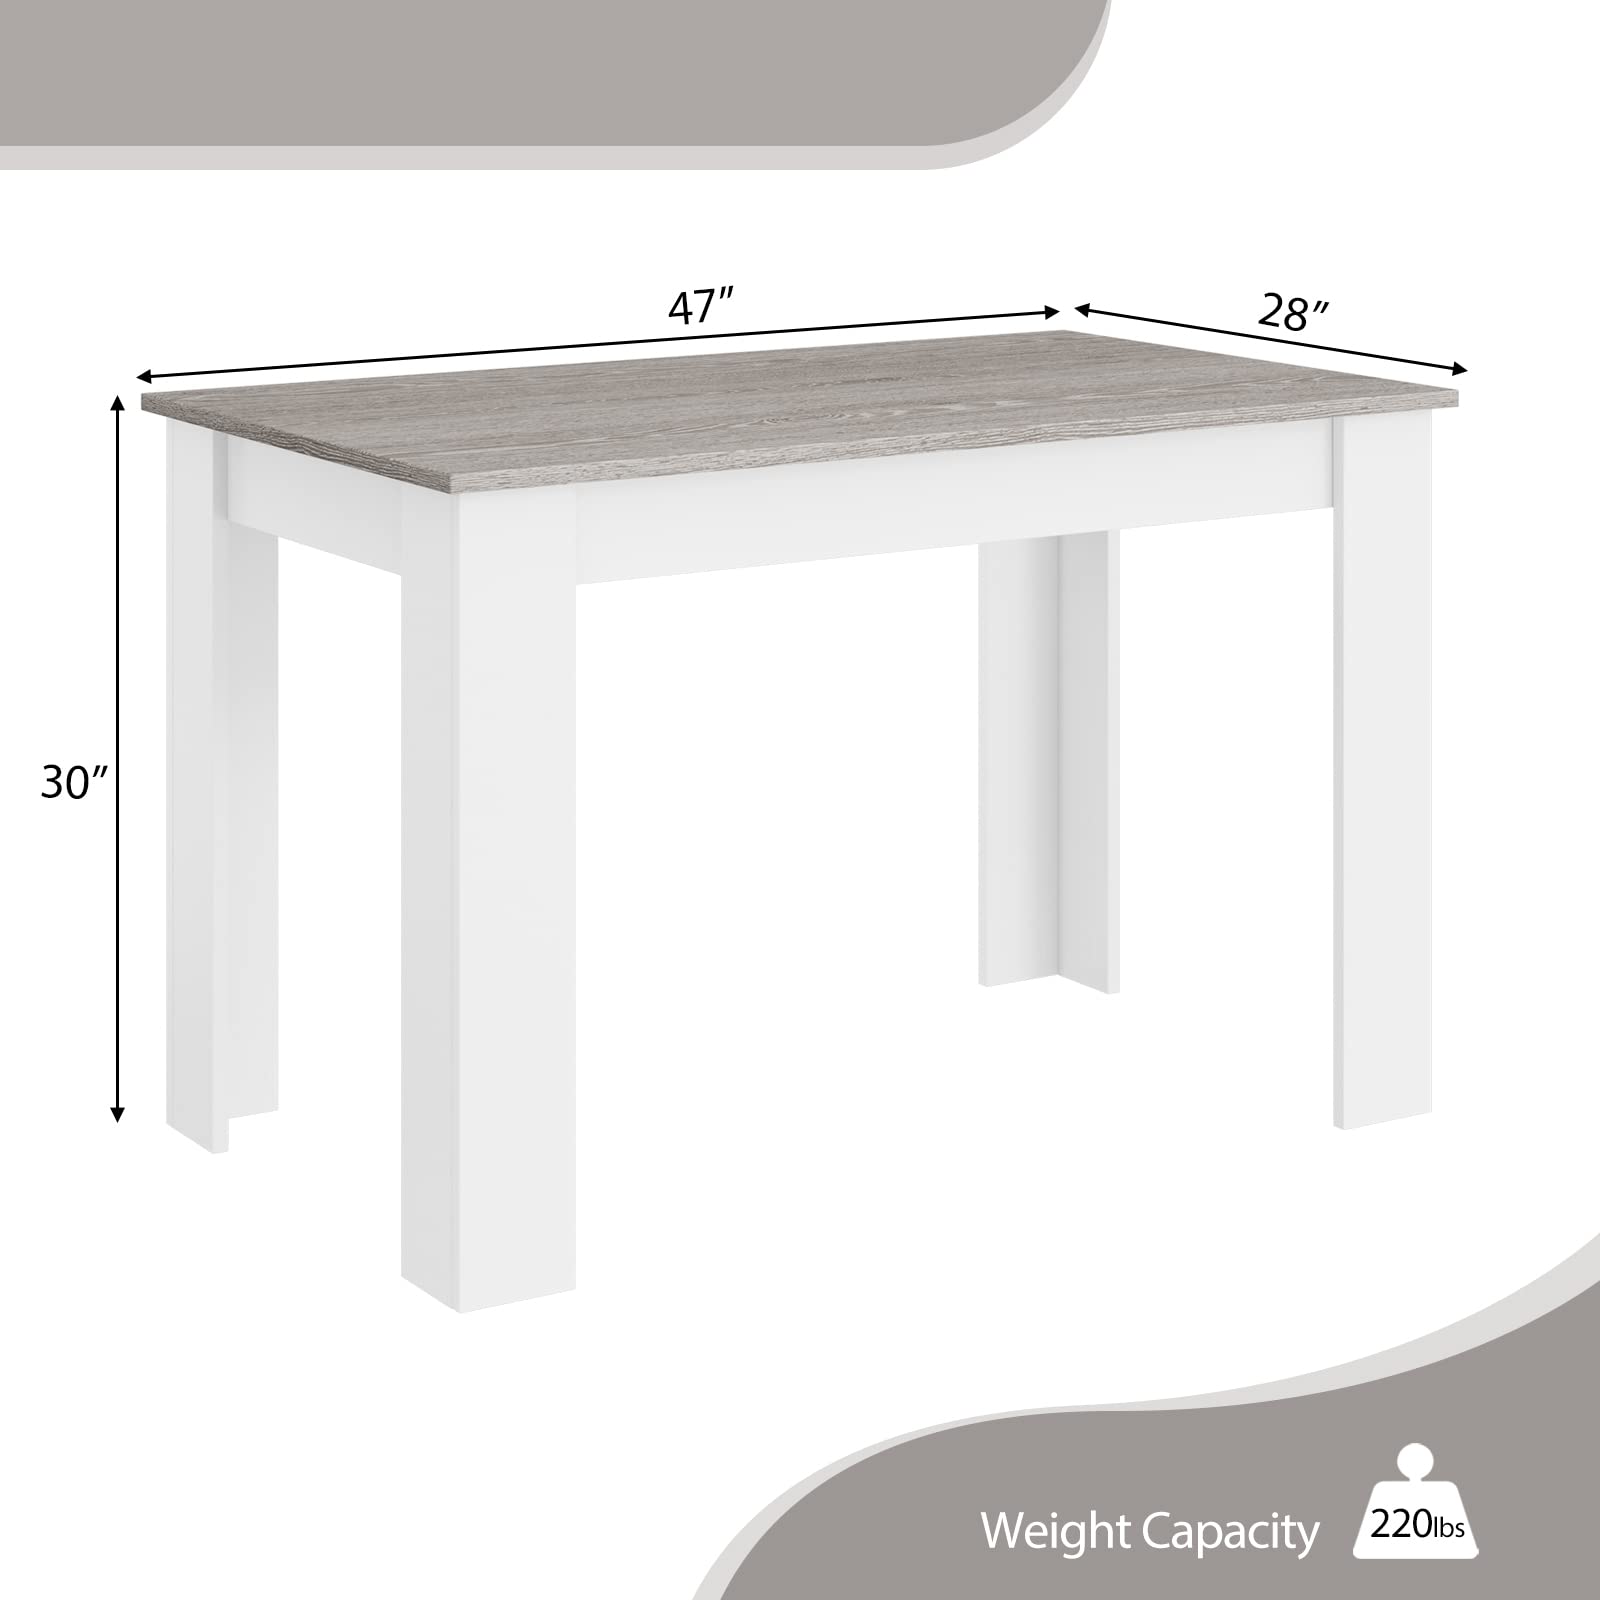 47 Inch Dining Table - Giantex